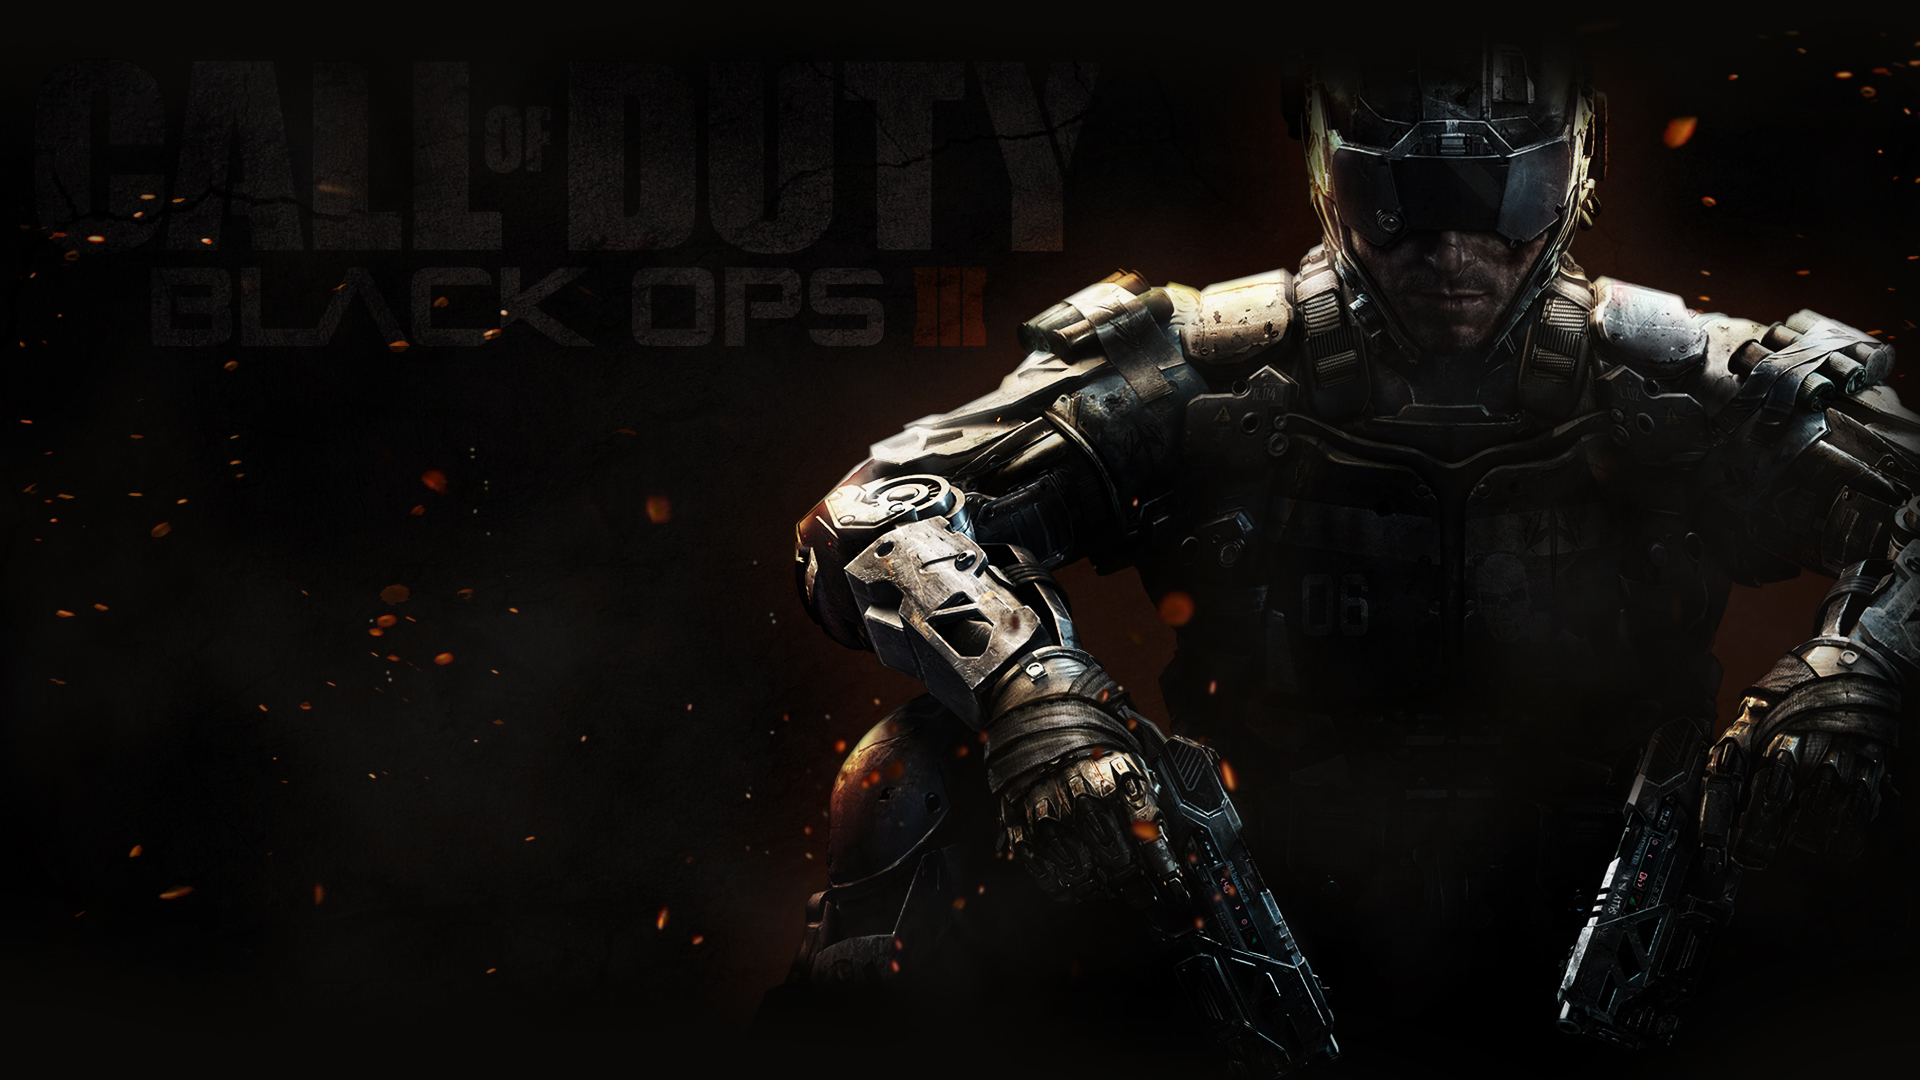 Call of Duty Black Ops 3 Wallpaper 01 by Toby Affenbude 1920x1080